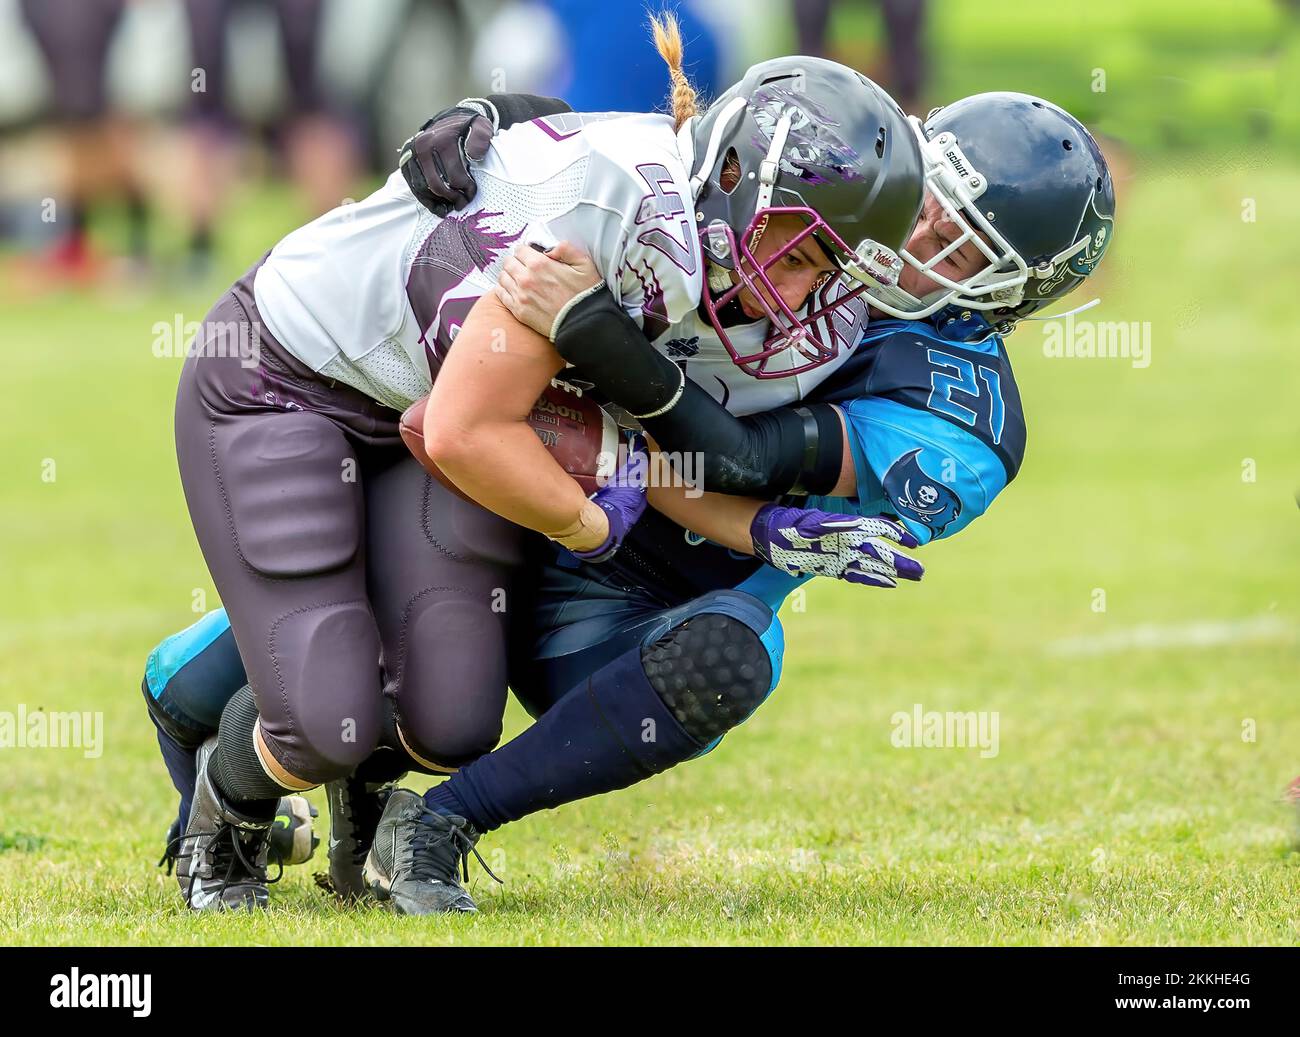 American Football Women's Action Tackle Stockfoto